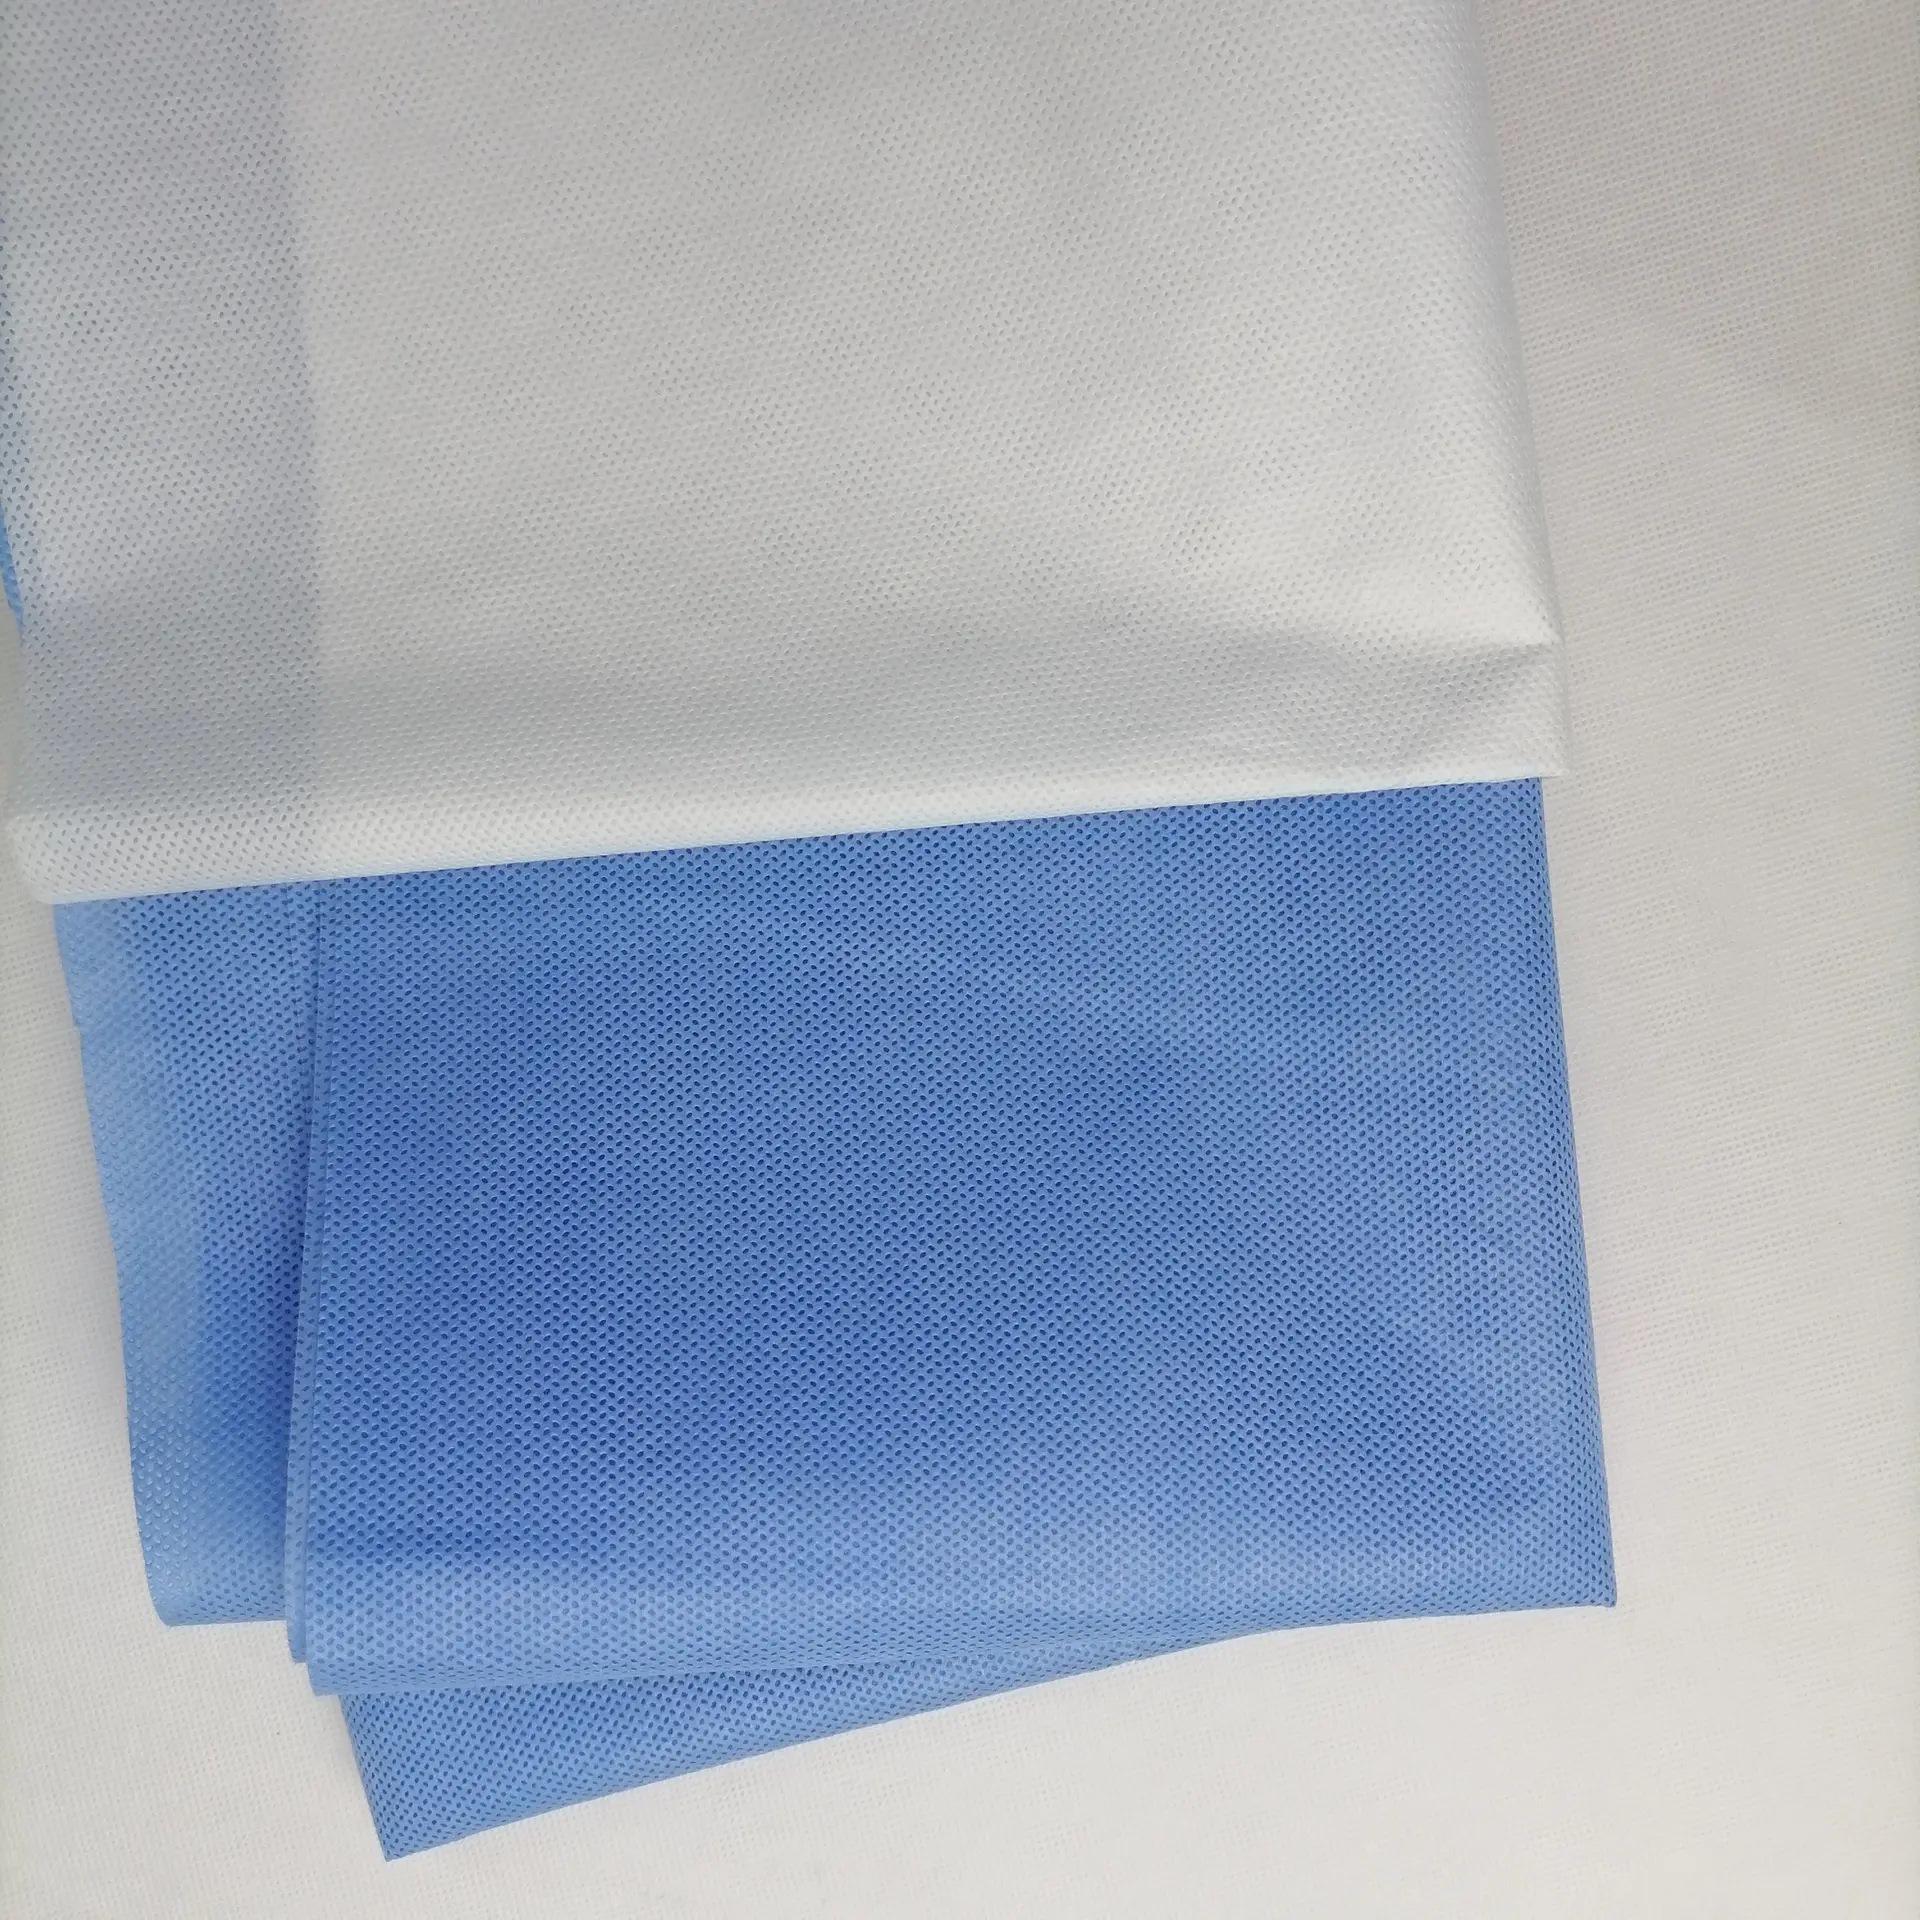 Factory direct low cost medical sms spunbond nonwoven